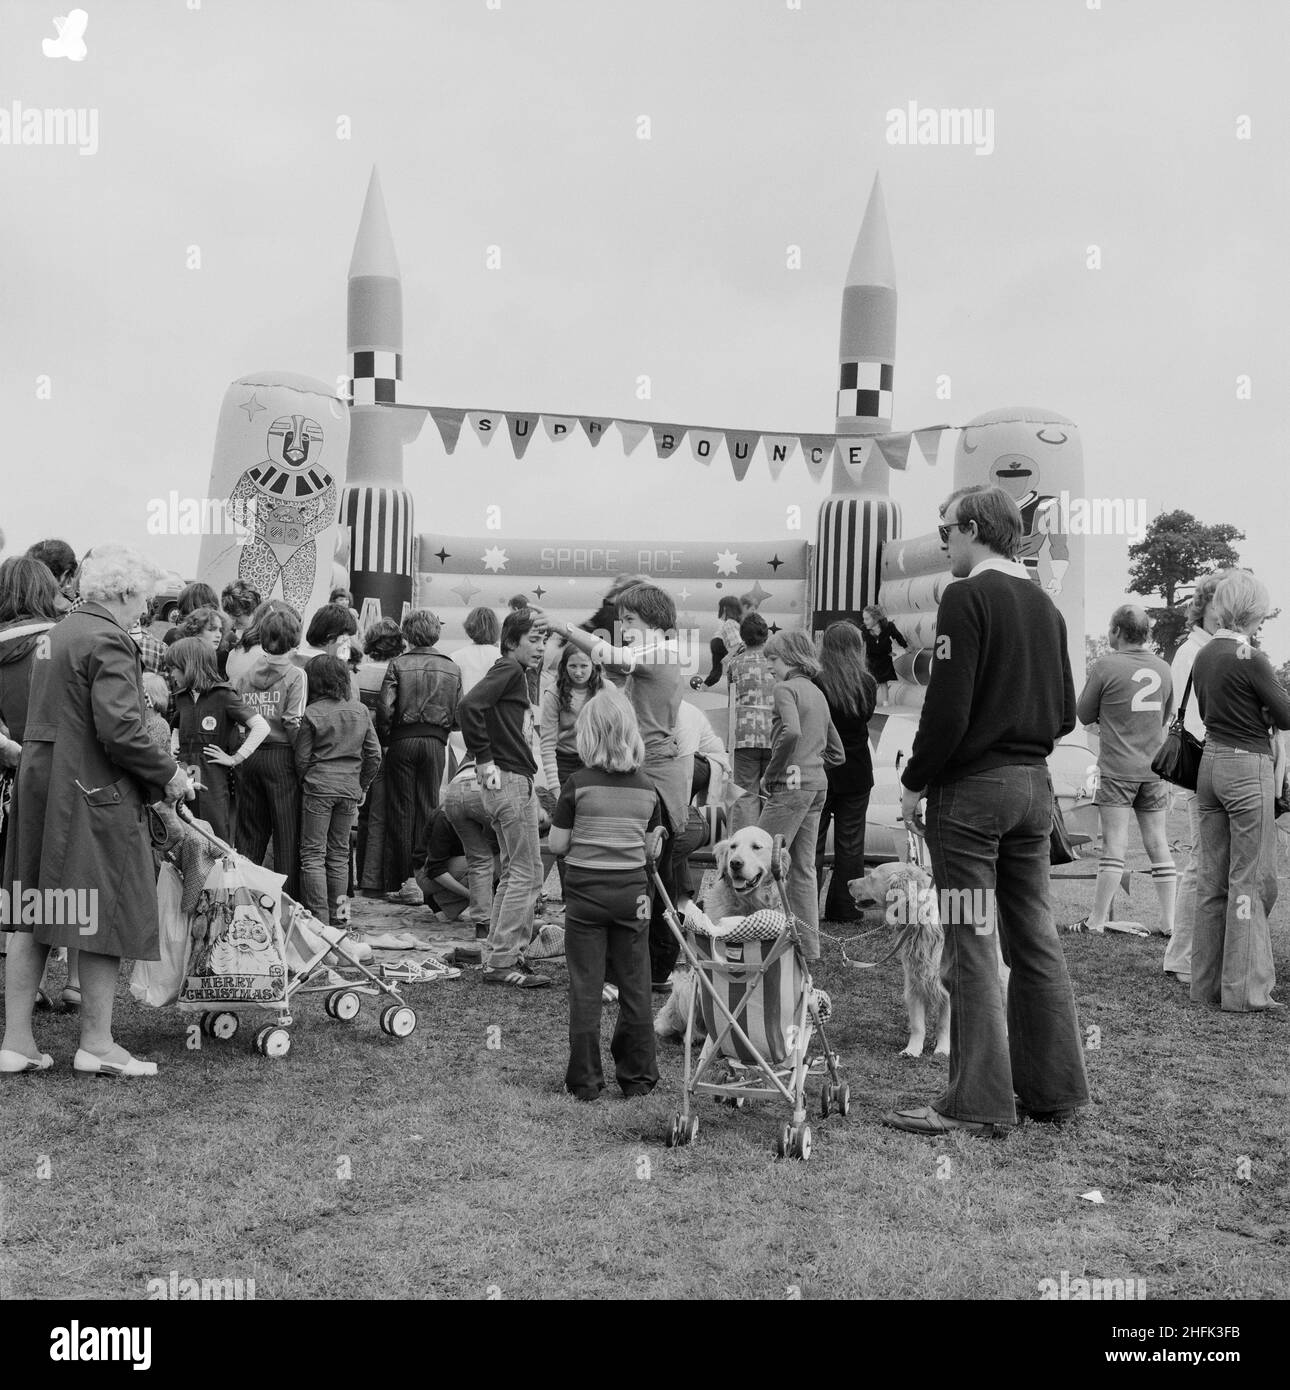 Laing Sports Ground, Rowley Lane, Elstree, Barnet, London, 16/06/1979. A crowd of people gathered around a bouncy castle at the annual Laing Gala Day. Stock Photo